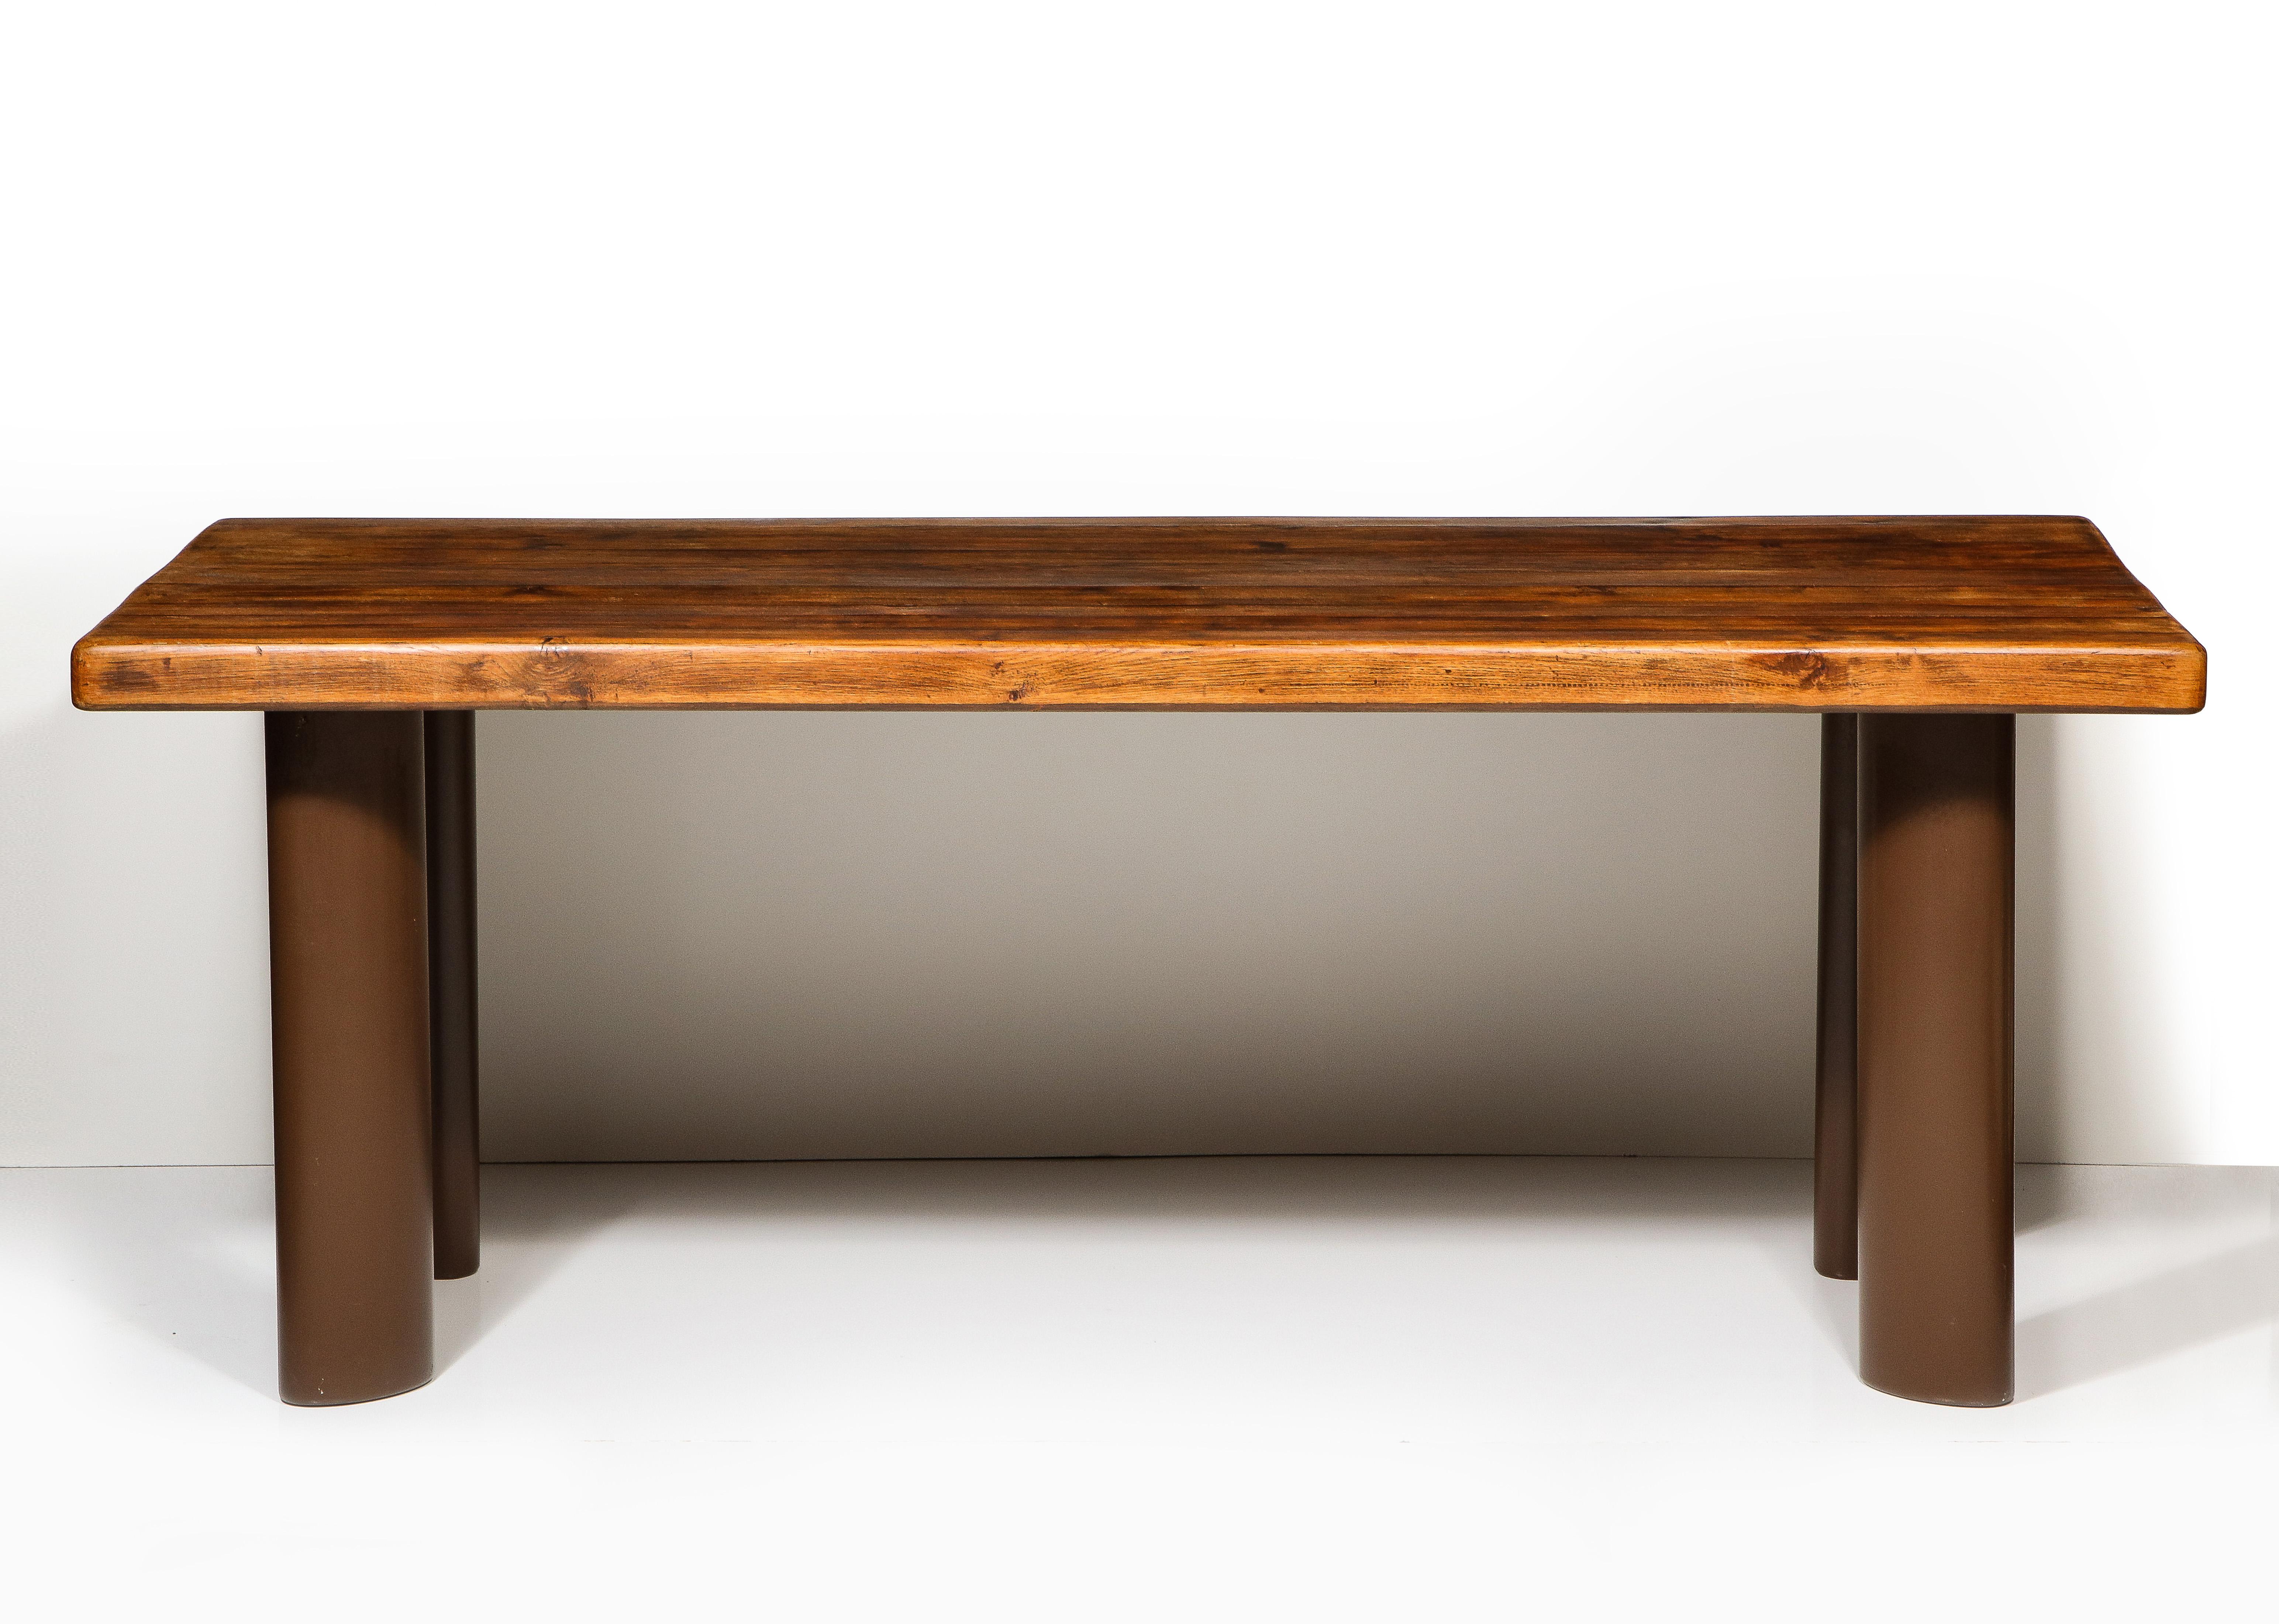 Oak and metal dining table in the Manner of Charlotte Perriand, France, c. Mid-20th century 

This simple yet highly sophisticated dining table is derived from a 1935 model that Perriand conceived and fabricated for clients Paul and Ange Guttmann.